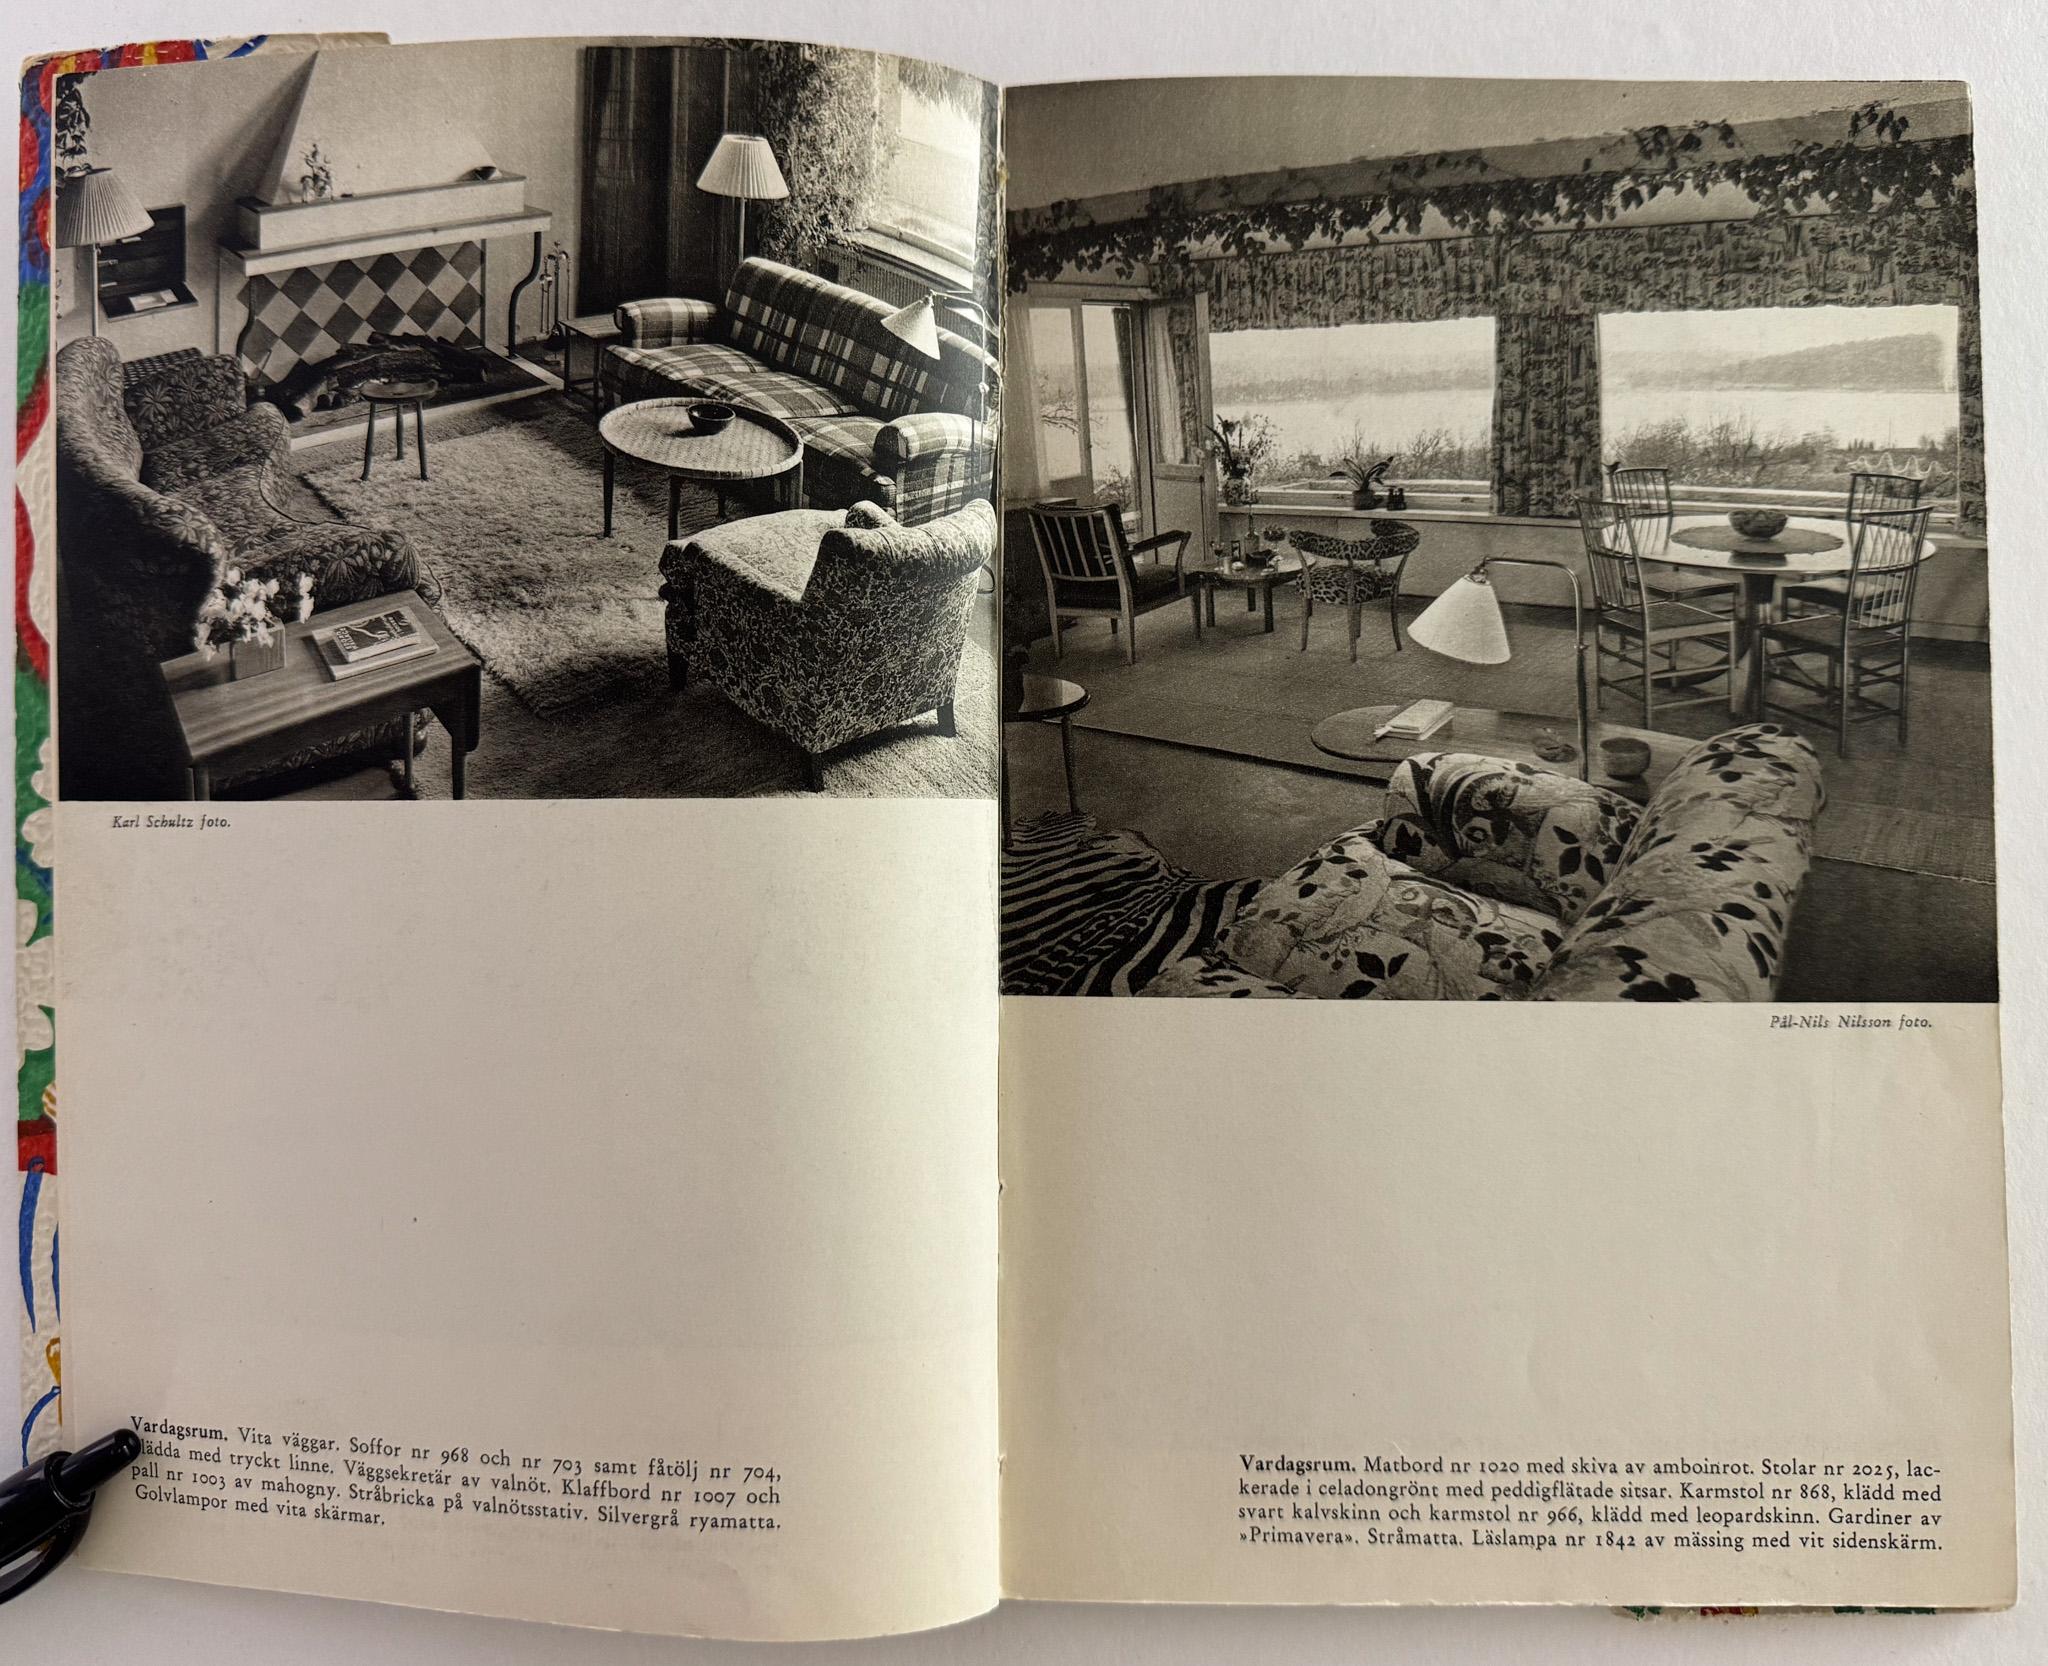 Svenskt Tenn catalog featuring the furniture, lighting, and botanical-print textile and wallpaper designs of in-house architect/designer Josef Frank. Published in the early 1950’s, the catalog showcases Frank’s expressive use of boldly contrasting